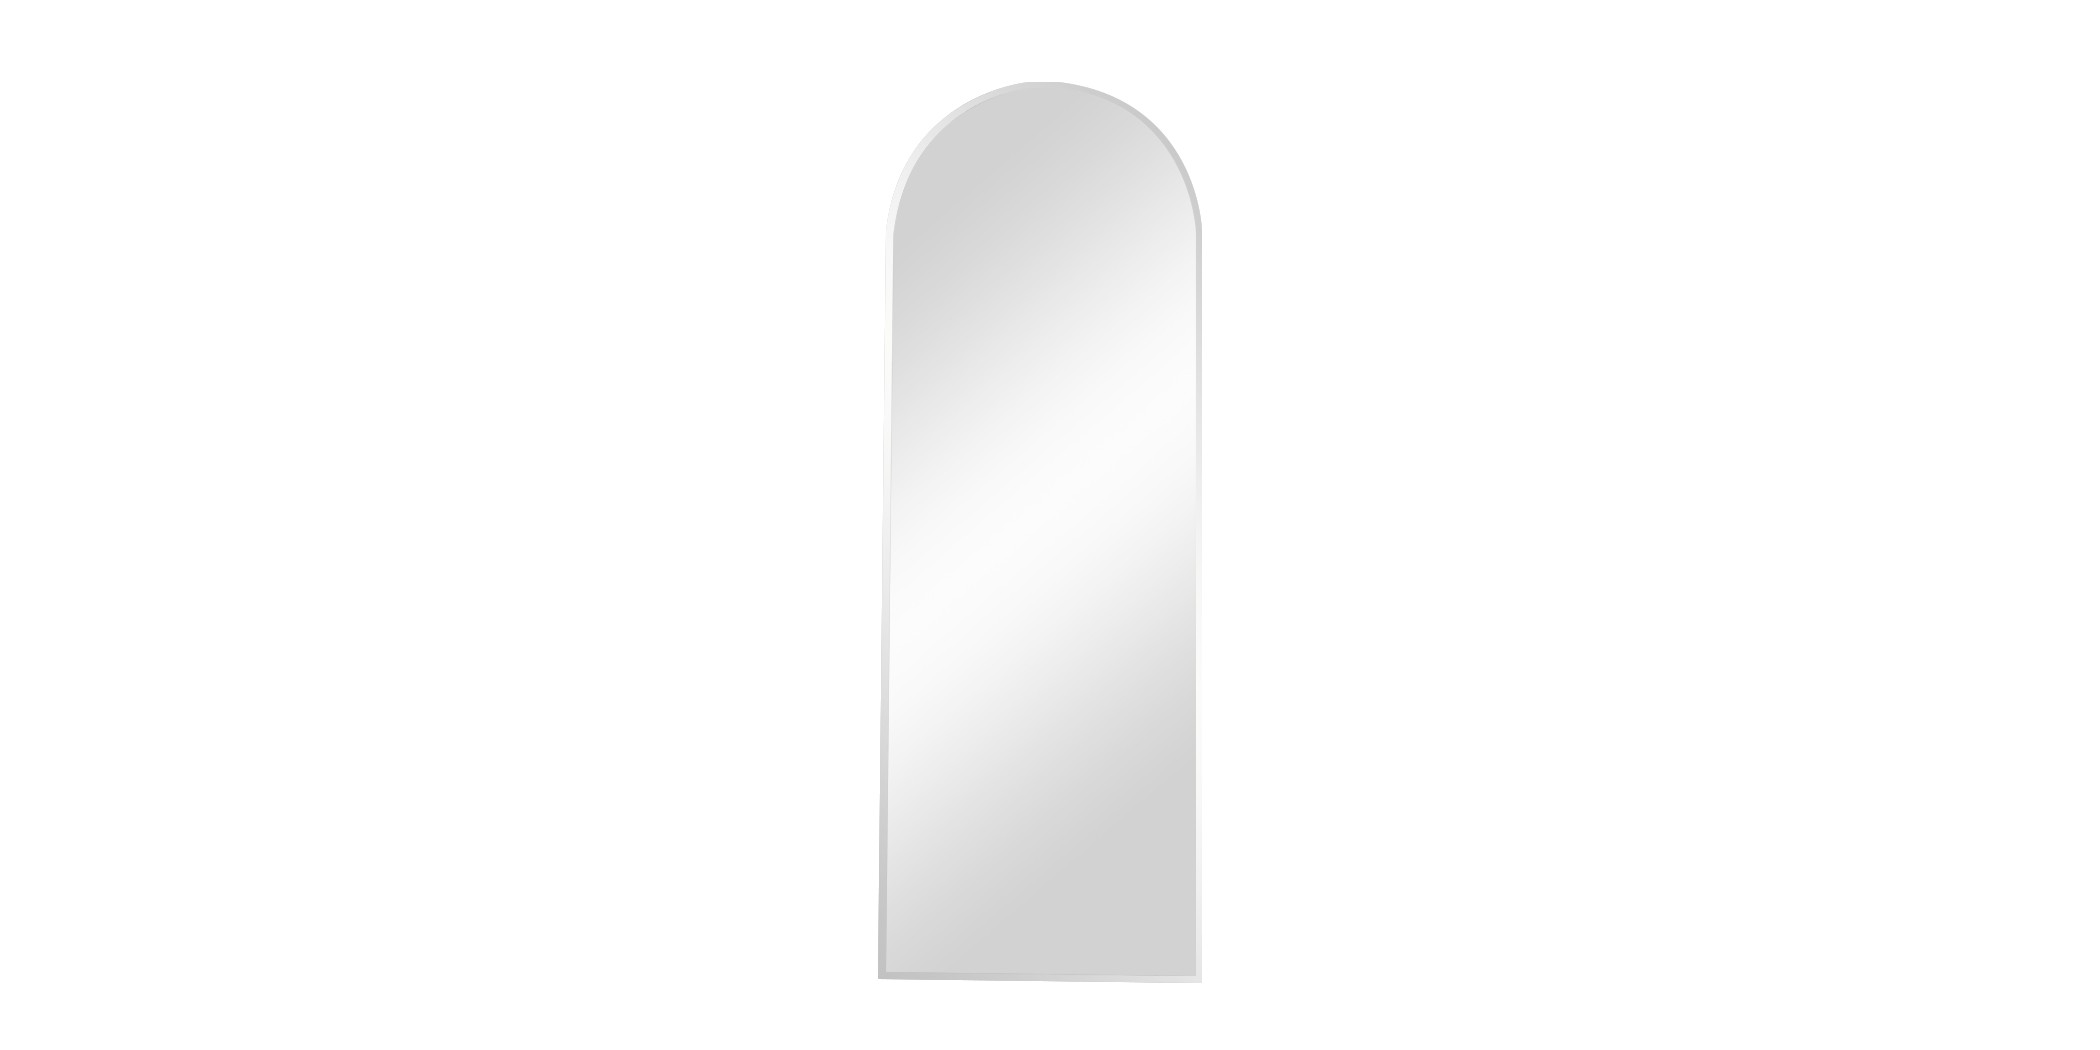 Arched Frameless Full Length Fitting Wall Mirror 60x170 cm